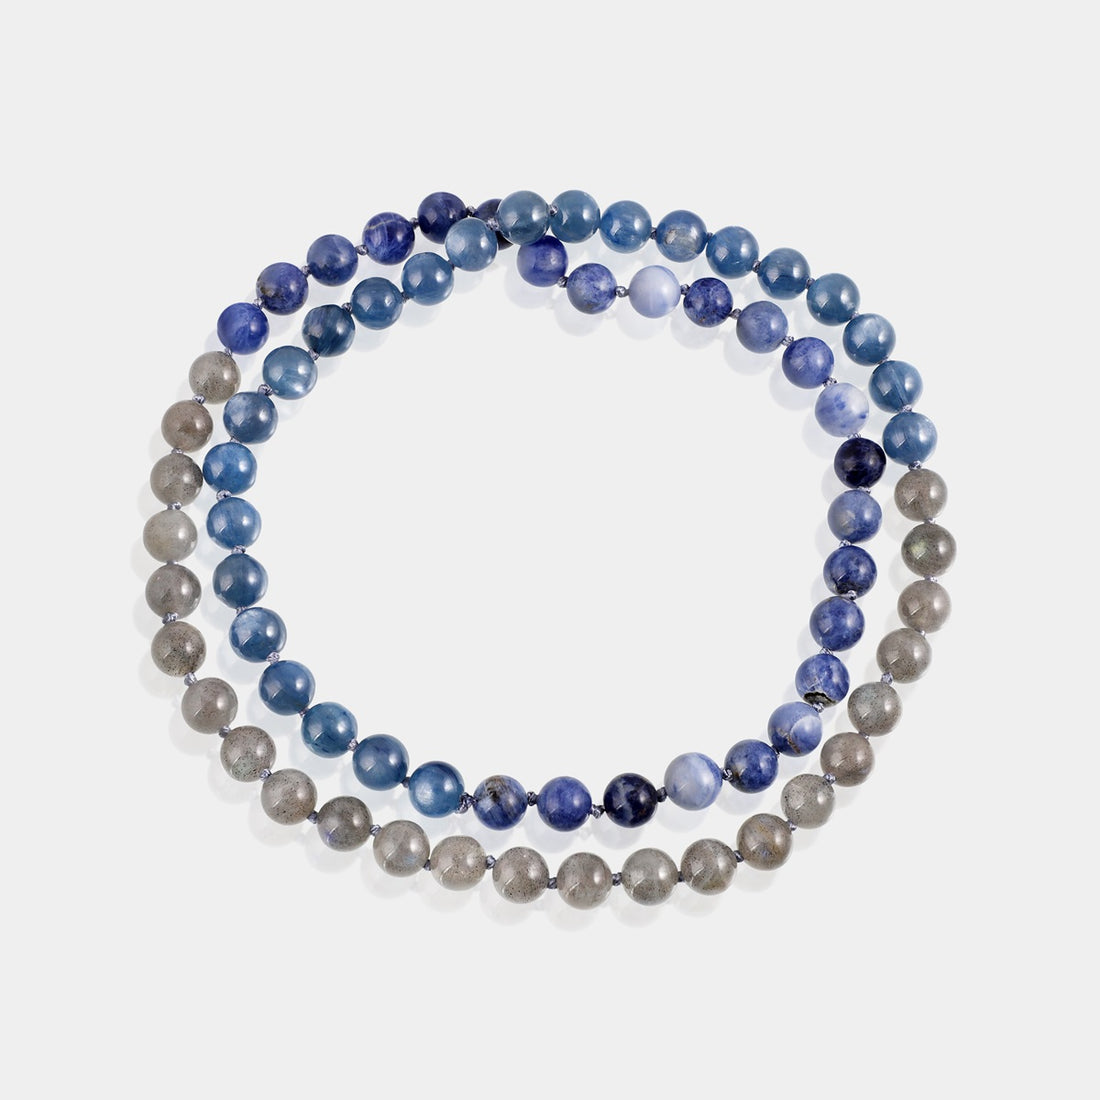 Jap Mala featuring natural Labradorite, Kyanite, and Sodalite gemstones, designed for mindfulness, spiritual growth, and holistic well-being.